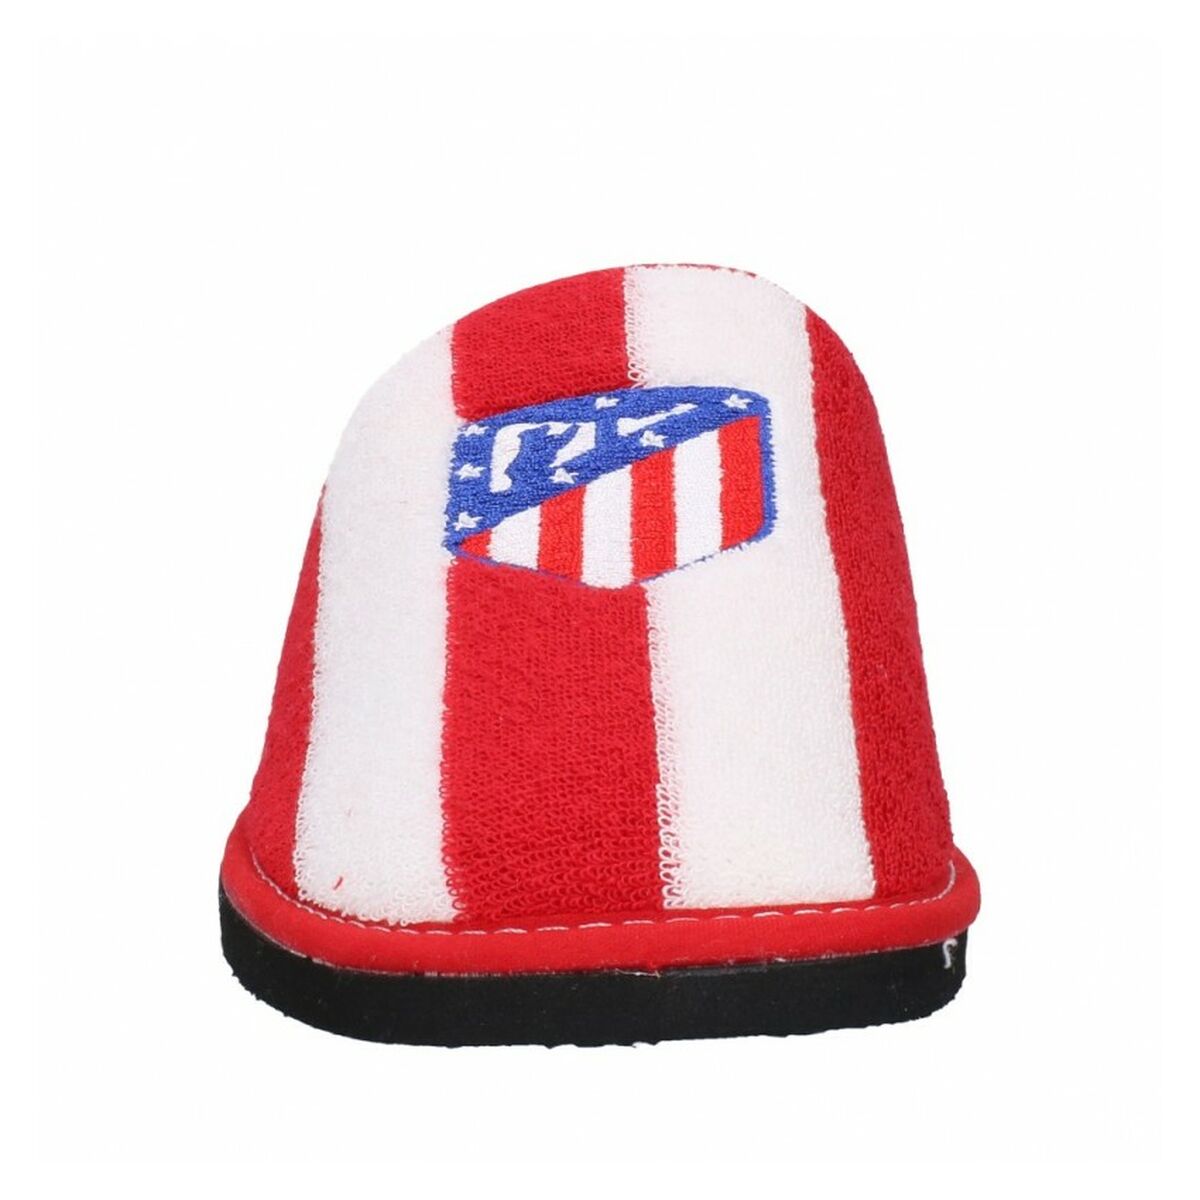 House Slippers Atlético de Madrid Andinas 799-20 Red